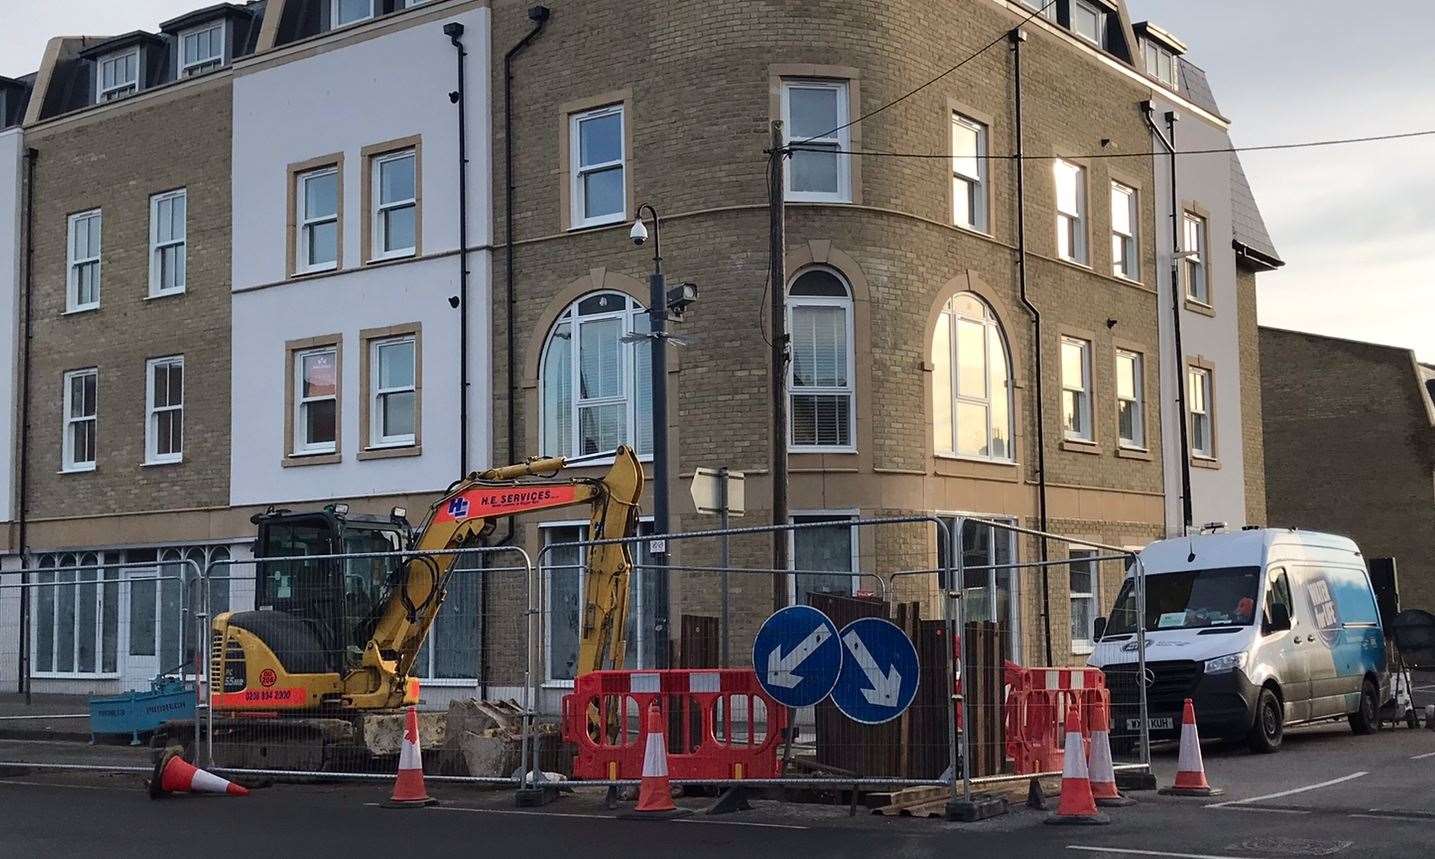 Temporary traffic lights were originally erected in Herne Bay High Street, before the route was sealed off yesterday